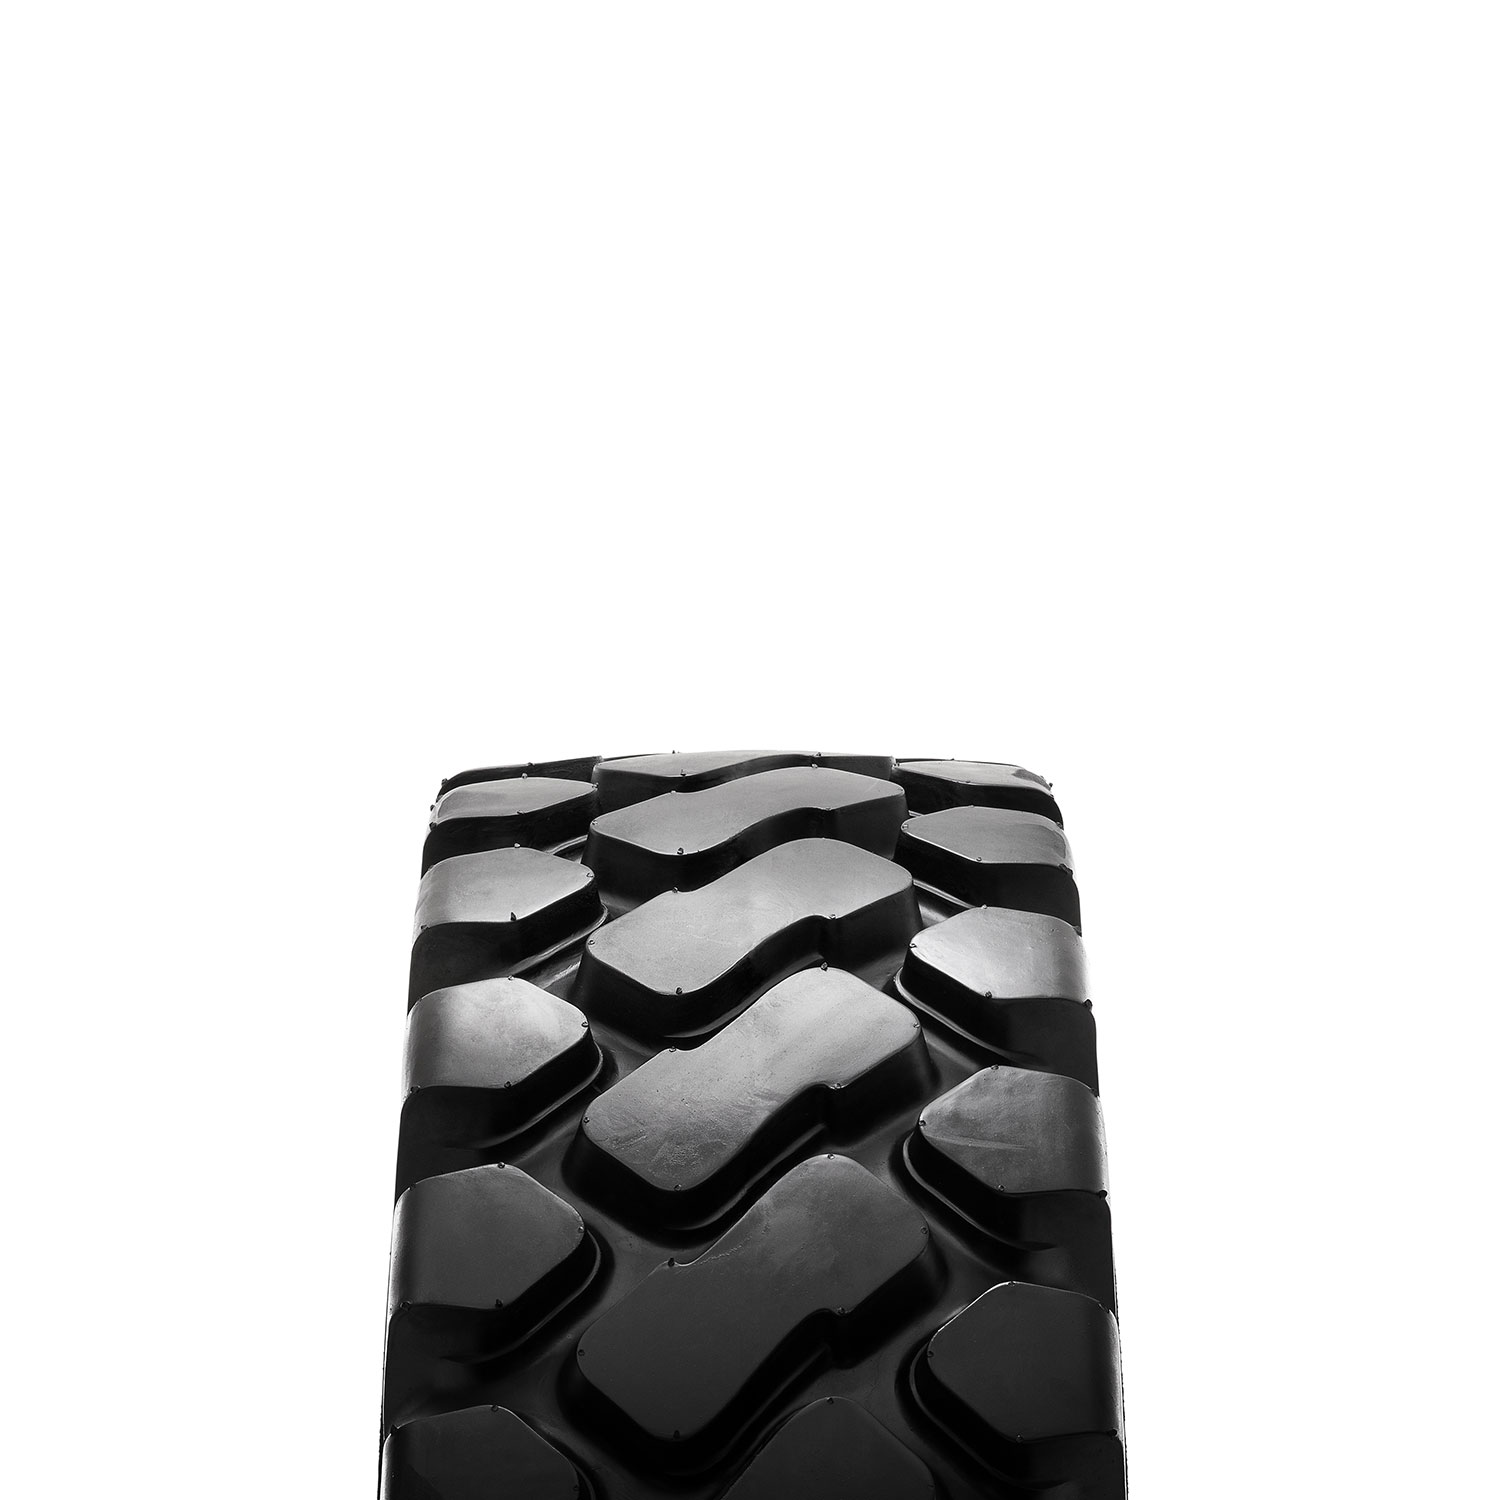 Gomme Nuove OTR-OUTRIGGER 445 / 55 - 19.5 R0 16PR STANDARD PAINTED OUT pneumatici nuovi Estivo